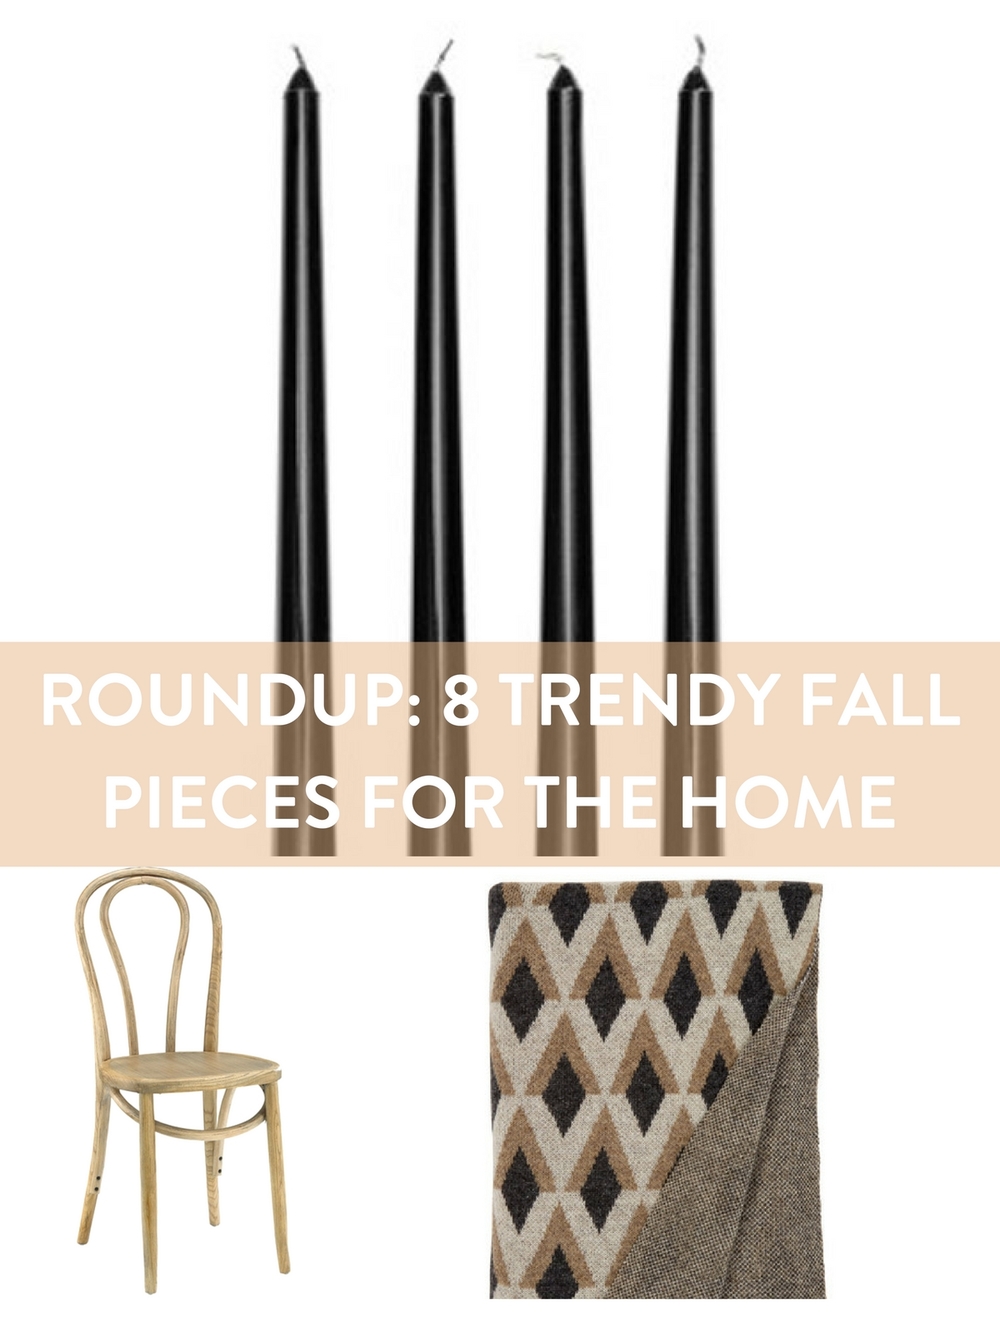 Roundup: 8 Trendy Fall Pieces For The Home